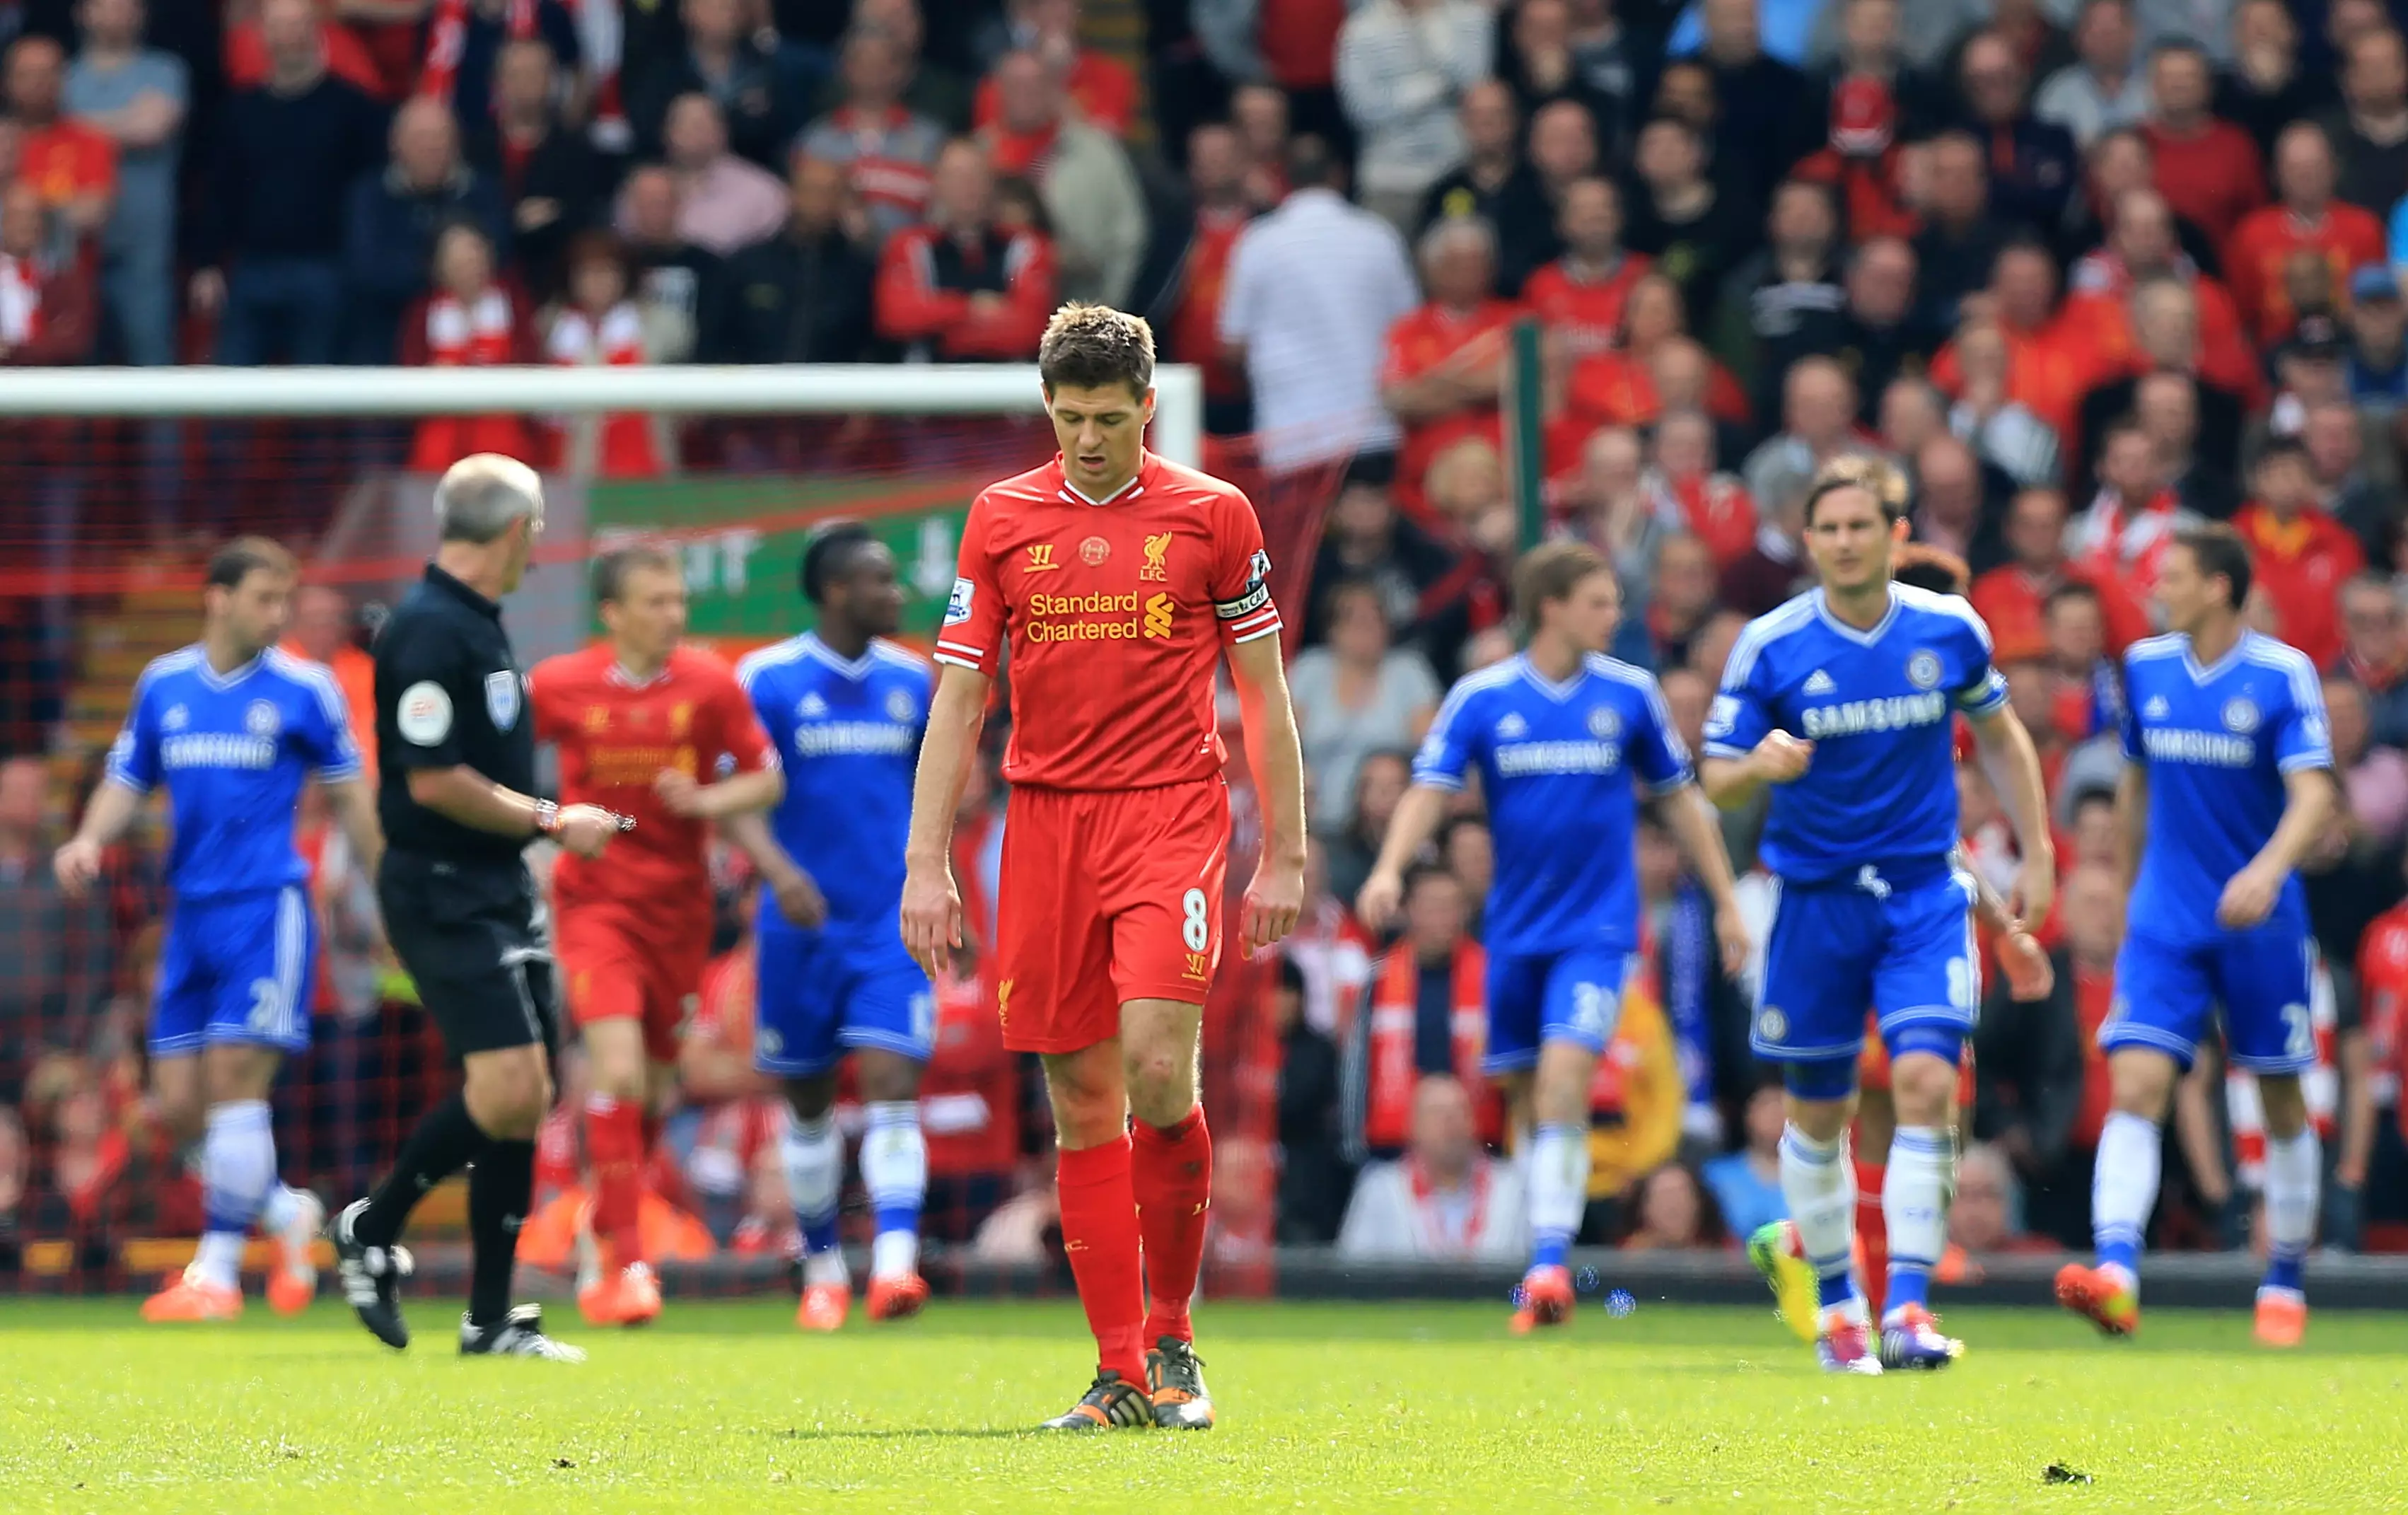 Gerrard dejected after the famous game in 2014. Image: PA Images